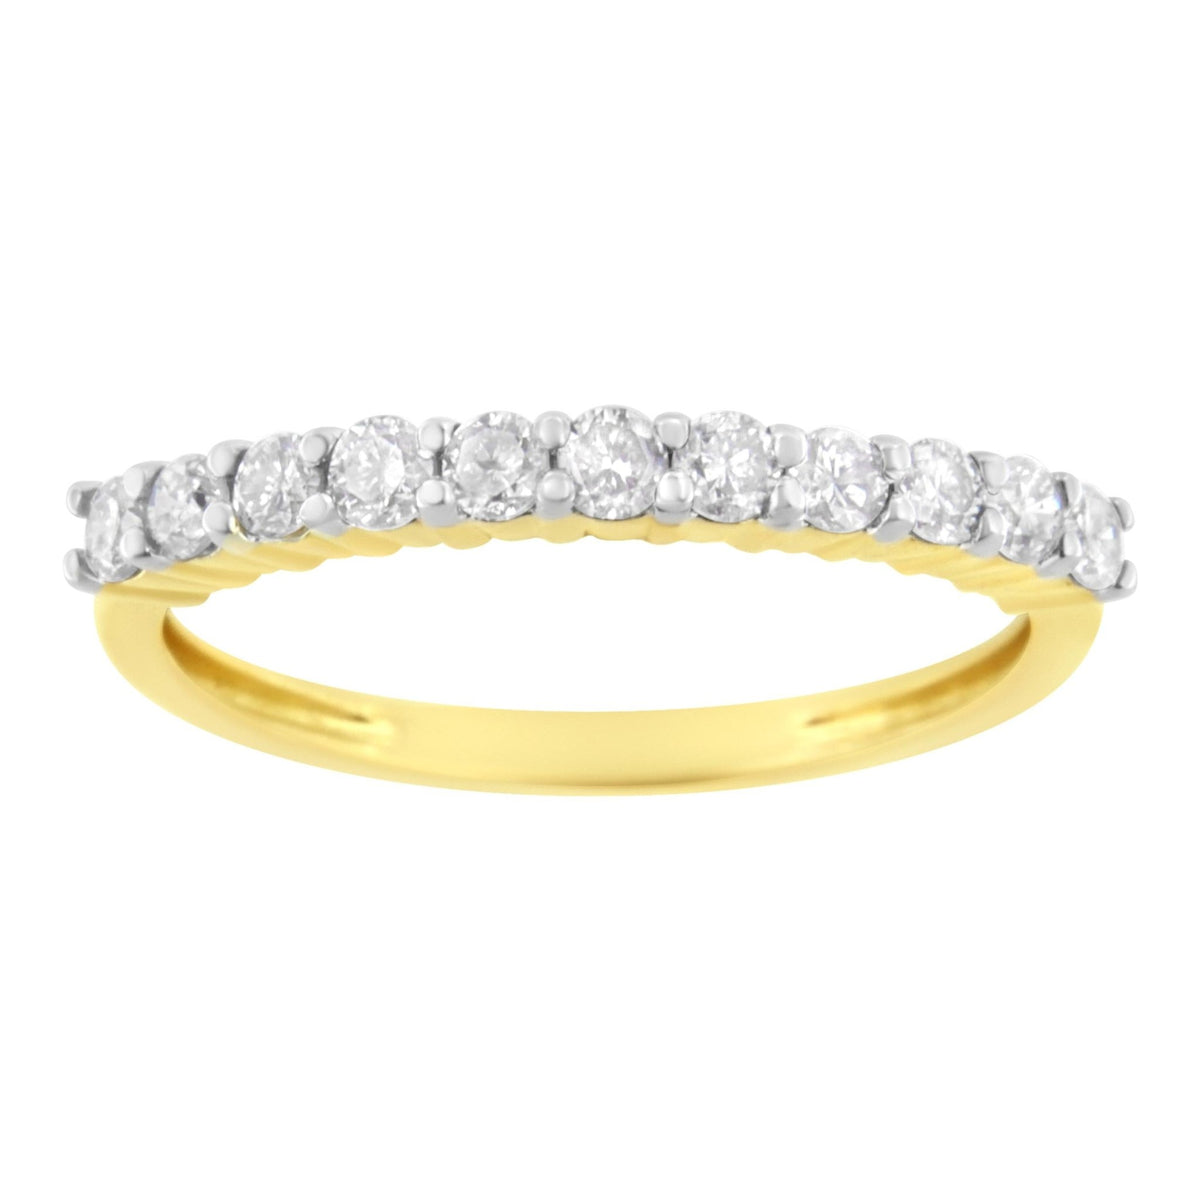 14K Yellow Gold Plated .925 Sterling Silver 1/2 cttw Shared Prong Set Brilliant Round-Cut Diamond 11 Stone Band Ring (I-J Color, SI1-SI2 Clarity) - Size 7 - LinkagejewelrydesignLinkagejewelrydesign